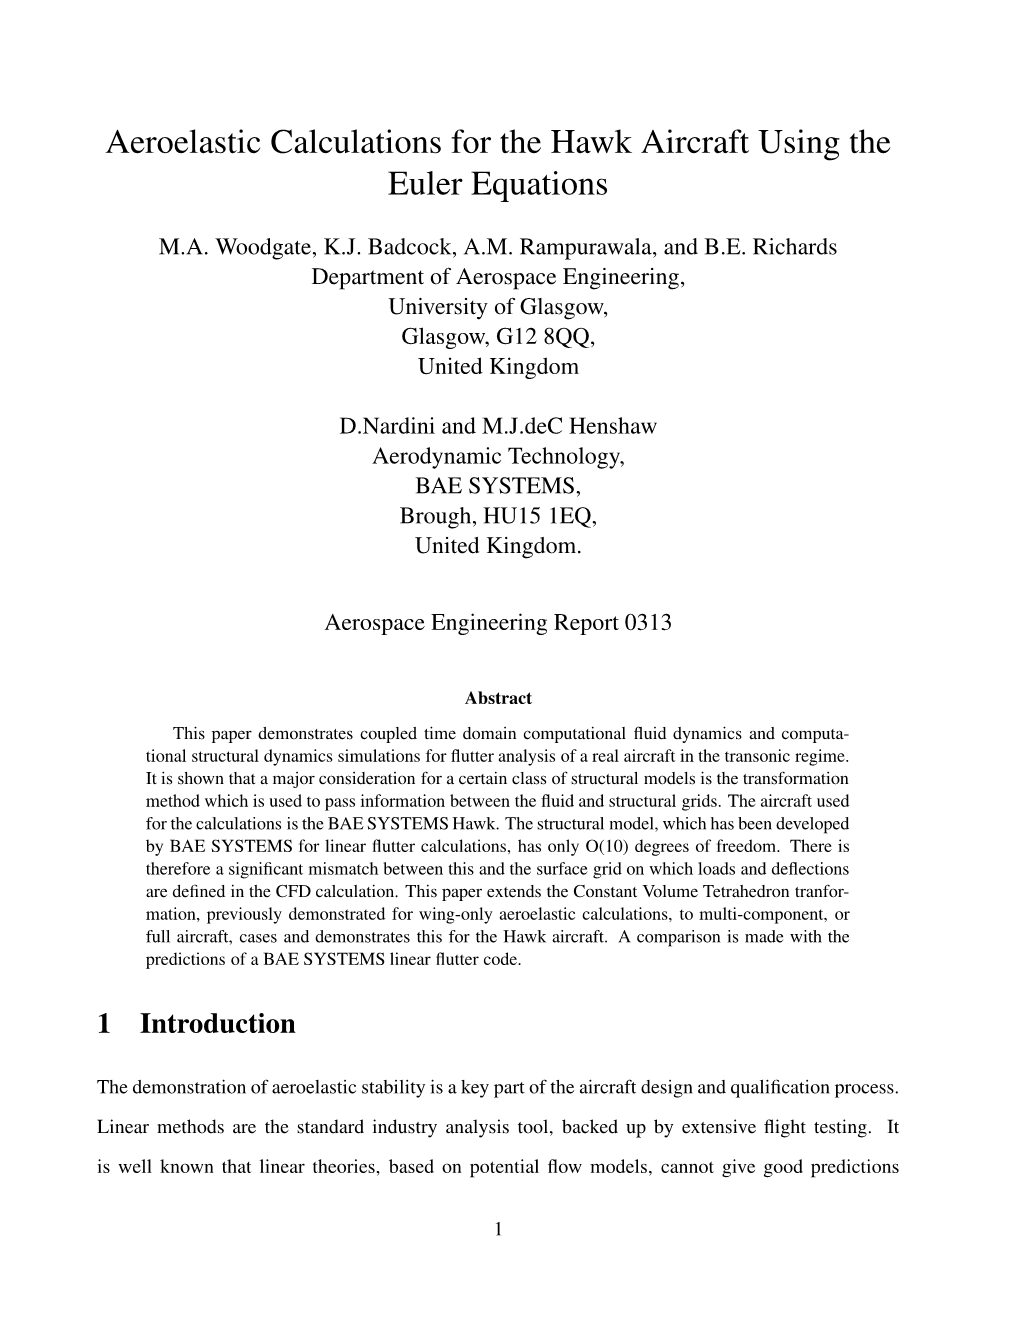 Aeroelastic Calculations for the Hawk Aircraft Using the Euler Equations